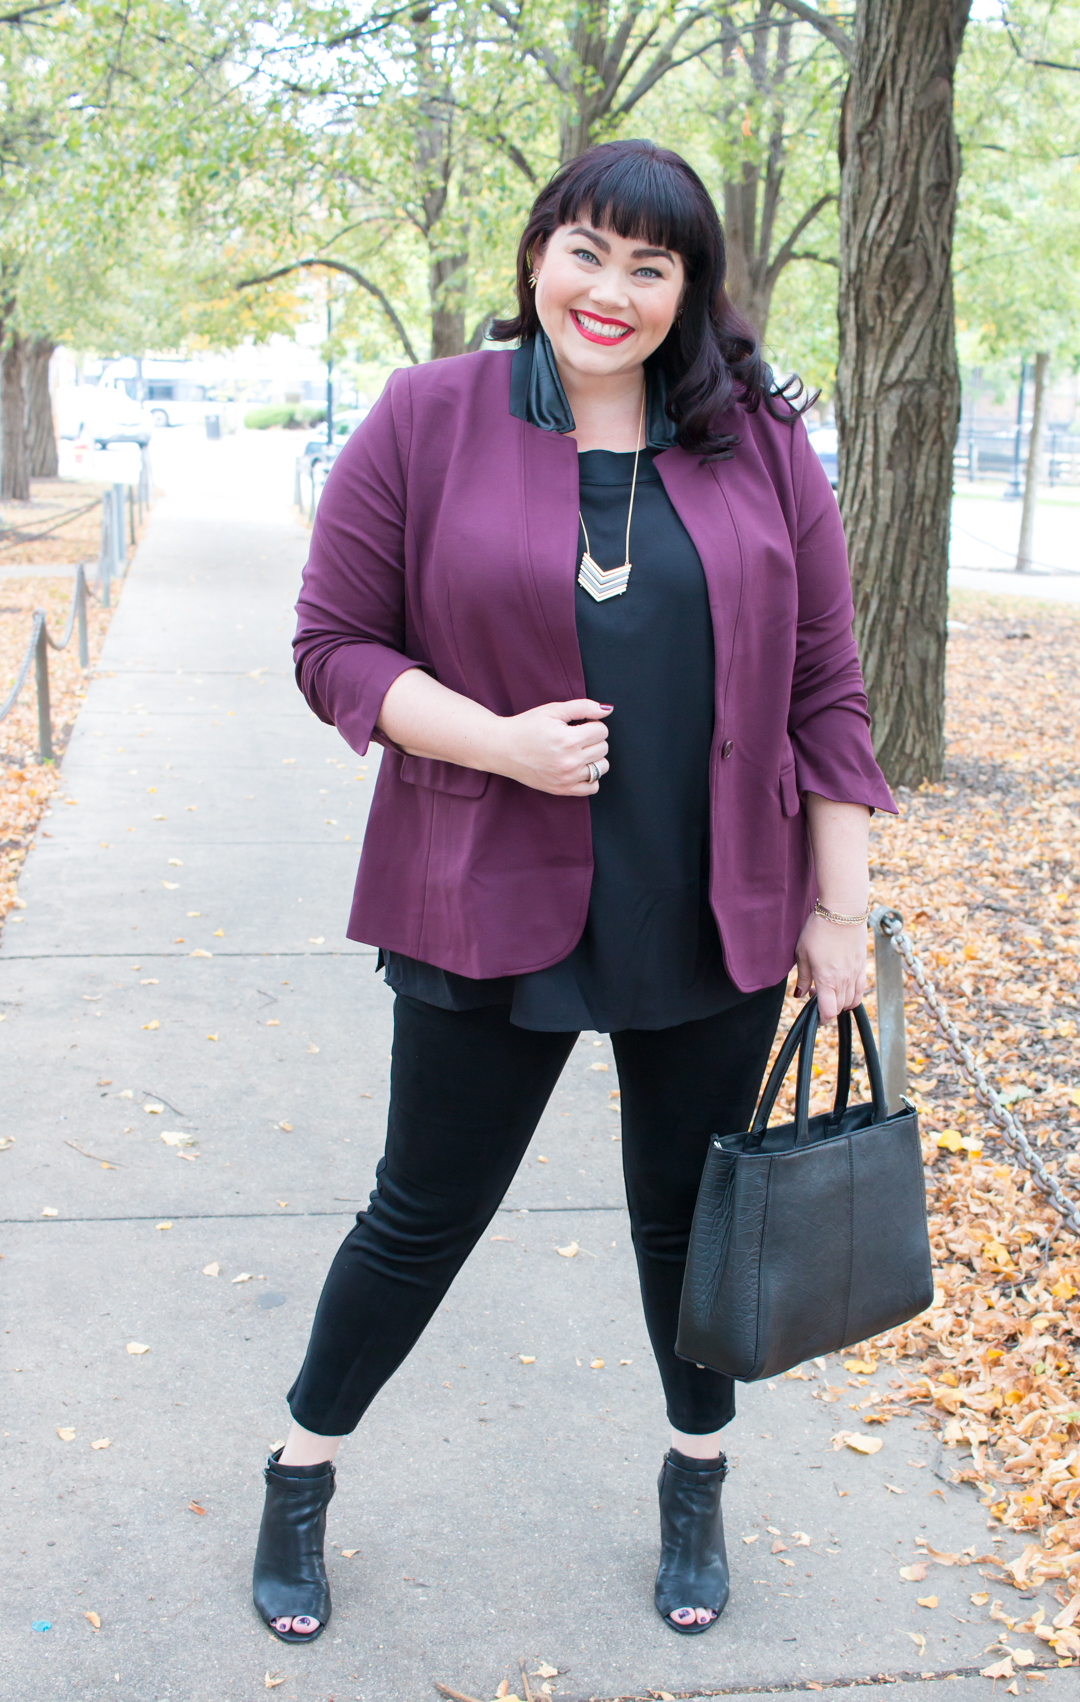 Style Plus Curves, Chicago Blogger, Chicago Plus Size Blogger, Plus Size Blogger, Amber McCulloch, Lane Bryant, Back to School Style, Bryant Blazer, Teacher Style, Fall Fashion